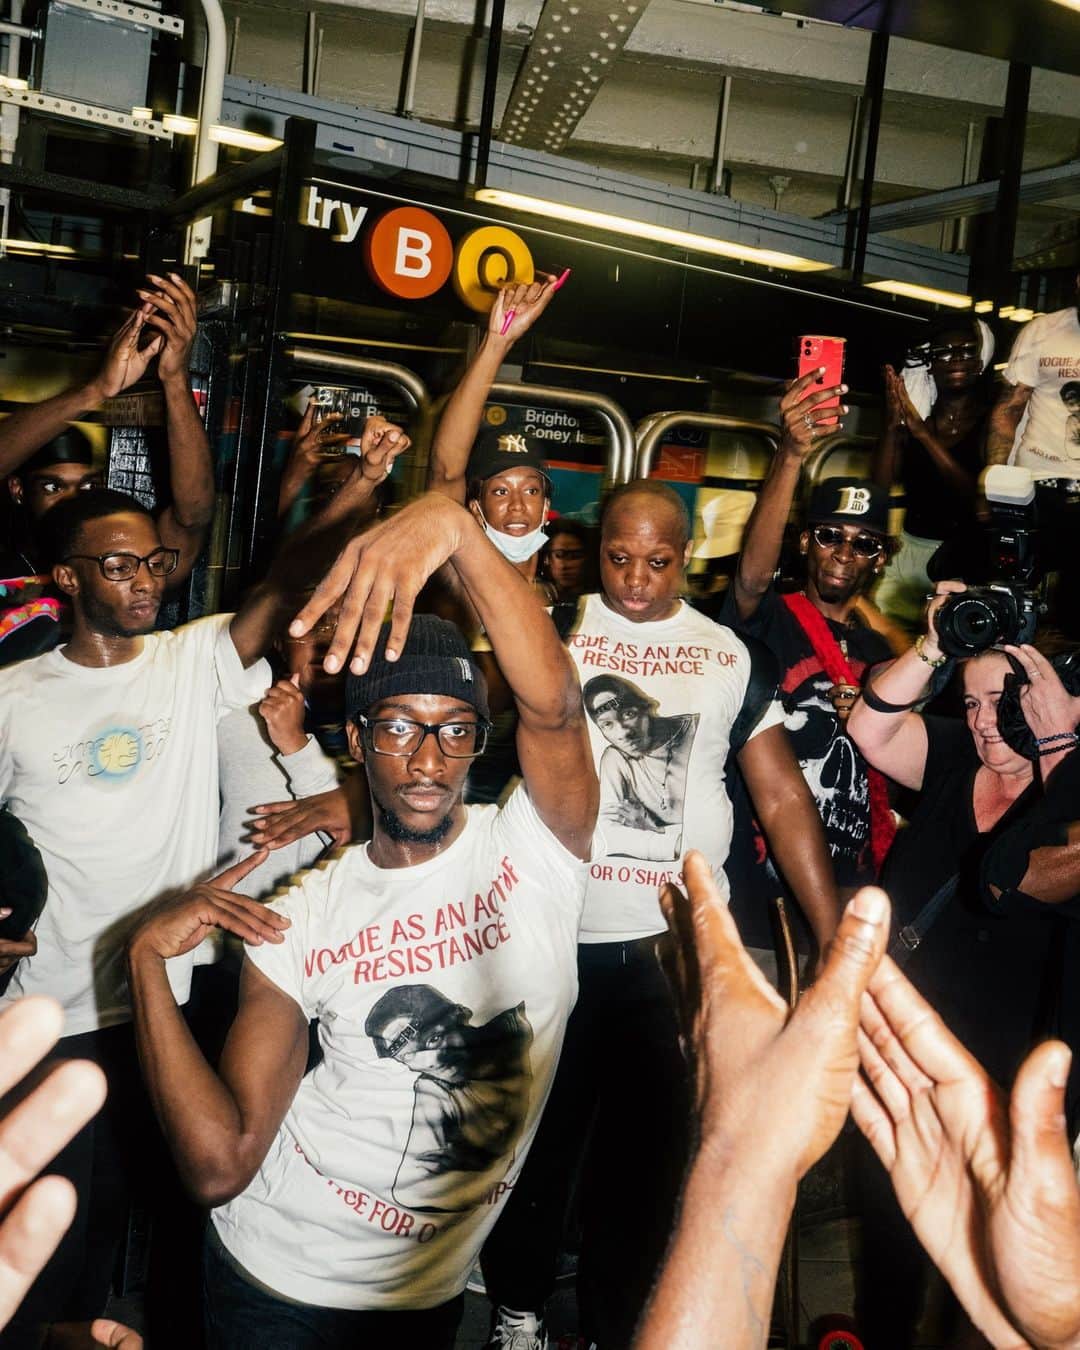 New York Times Fashionのインスタグラム：「Hundreds of mourners gathered on Friday at the Brooklyn gas station where O’Shae Sibley, a 28-year-old dancer and choreographer, was fatally stabbed last weekend after a dispute over his vogueing in the parking lot.  They chanted Sibley’s name while carrying Pride flags and posters that read “Vogueing is resistance.” At the foot of the gas station sign, some left shrines of lit candles, flowers and photographs of Sibley dancing.  As evening fell, LGBTQ activists and dancers took the megaphone to pay tribute to Sibley, who was gay and Black and whose murder has been charged as a hate crime.  In the moments before his death, Sibley and four friends stopped at the Mobil station on Coney Island Avenue after a day at the beach. They were vogueing to Beyoncé’s “Renaissance” album when they were confronted by a group of young men who told them to stop dancing and hurled gay and racist slurs. One of them pulled a knife and stabbed Sibley. His apparent attacker, a 17-year-old Brooklyn resident whose name has not been revealed, turned himself in to the authorities on Friday. He was charged with second-degree murder and criminal possession of a weapon.  Read more about the vigil for Sibley at the link in our bio. Photos by @poupayphoto」